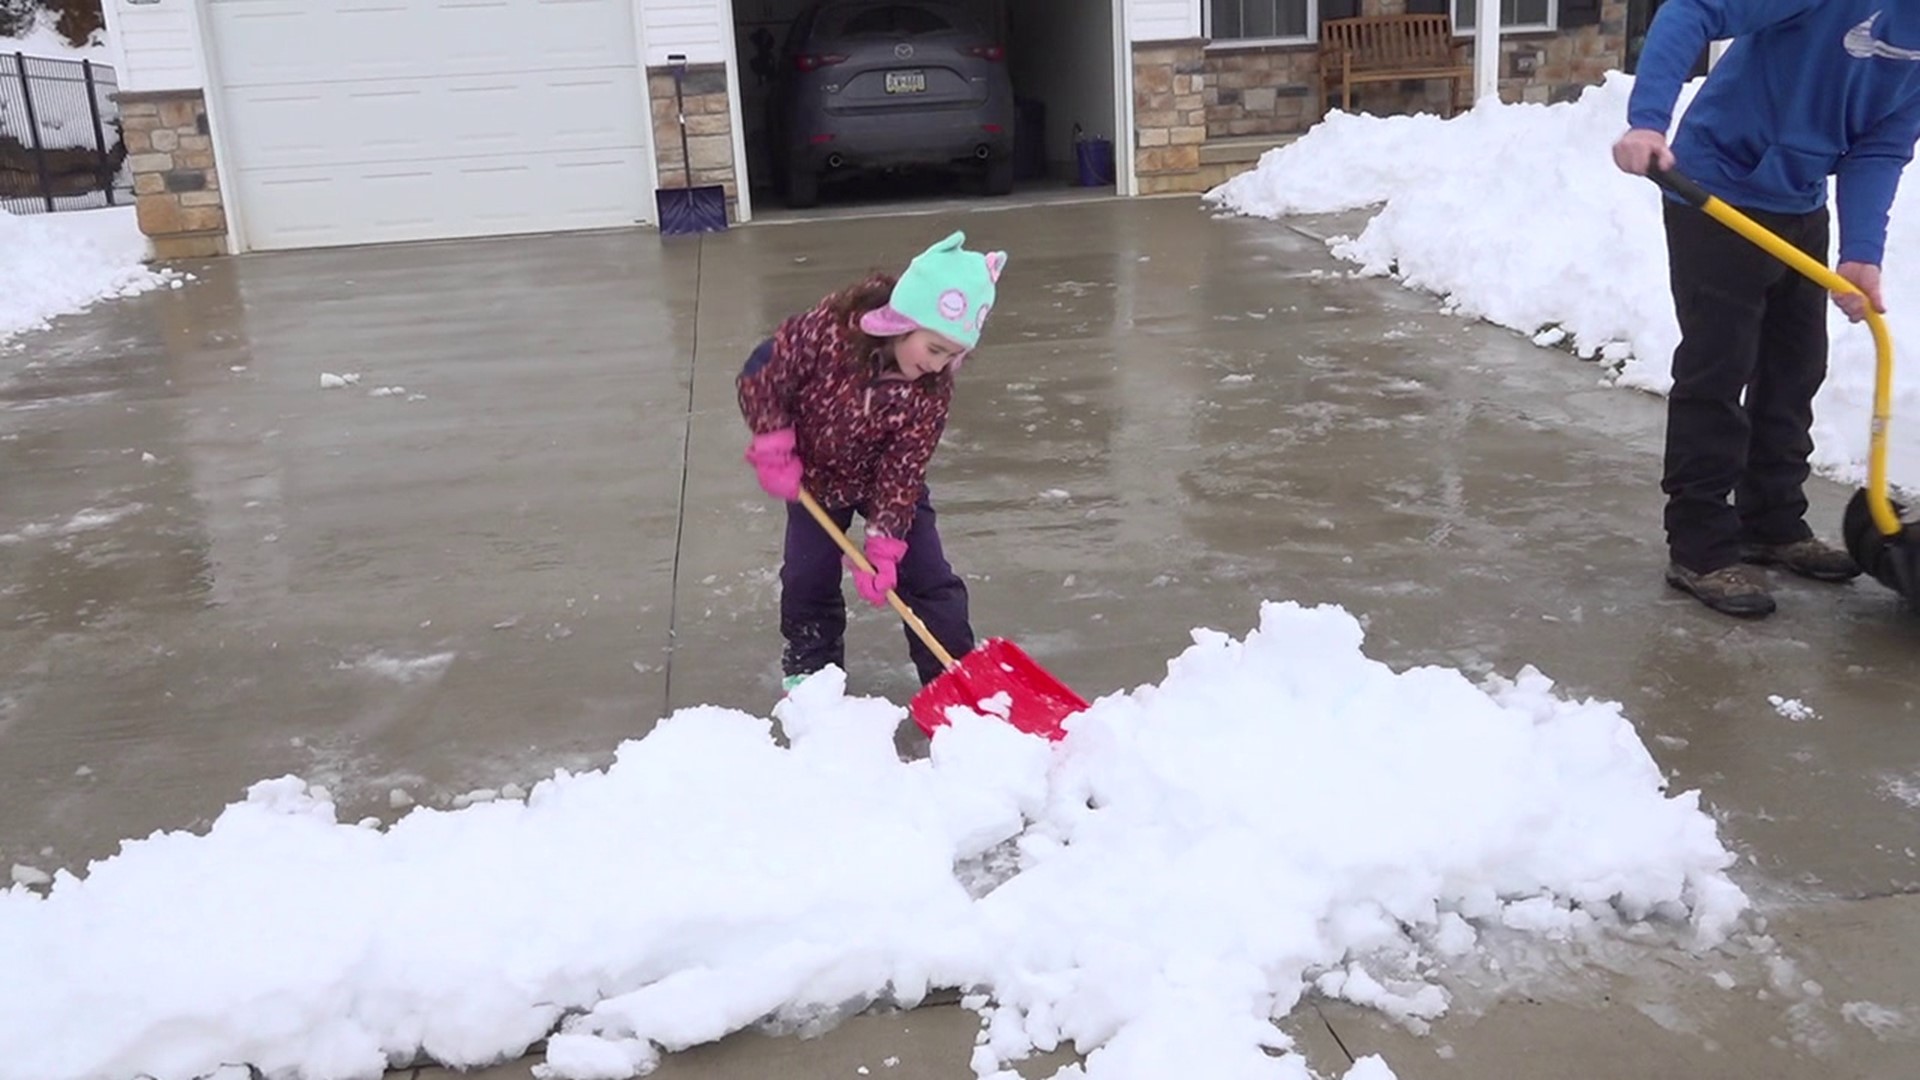 After 13 inches of snow fell in Carbon County, it was a day full of work for some and a day full of play for others.